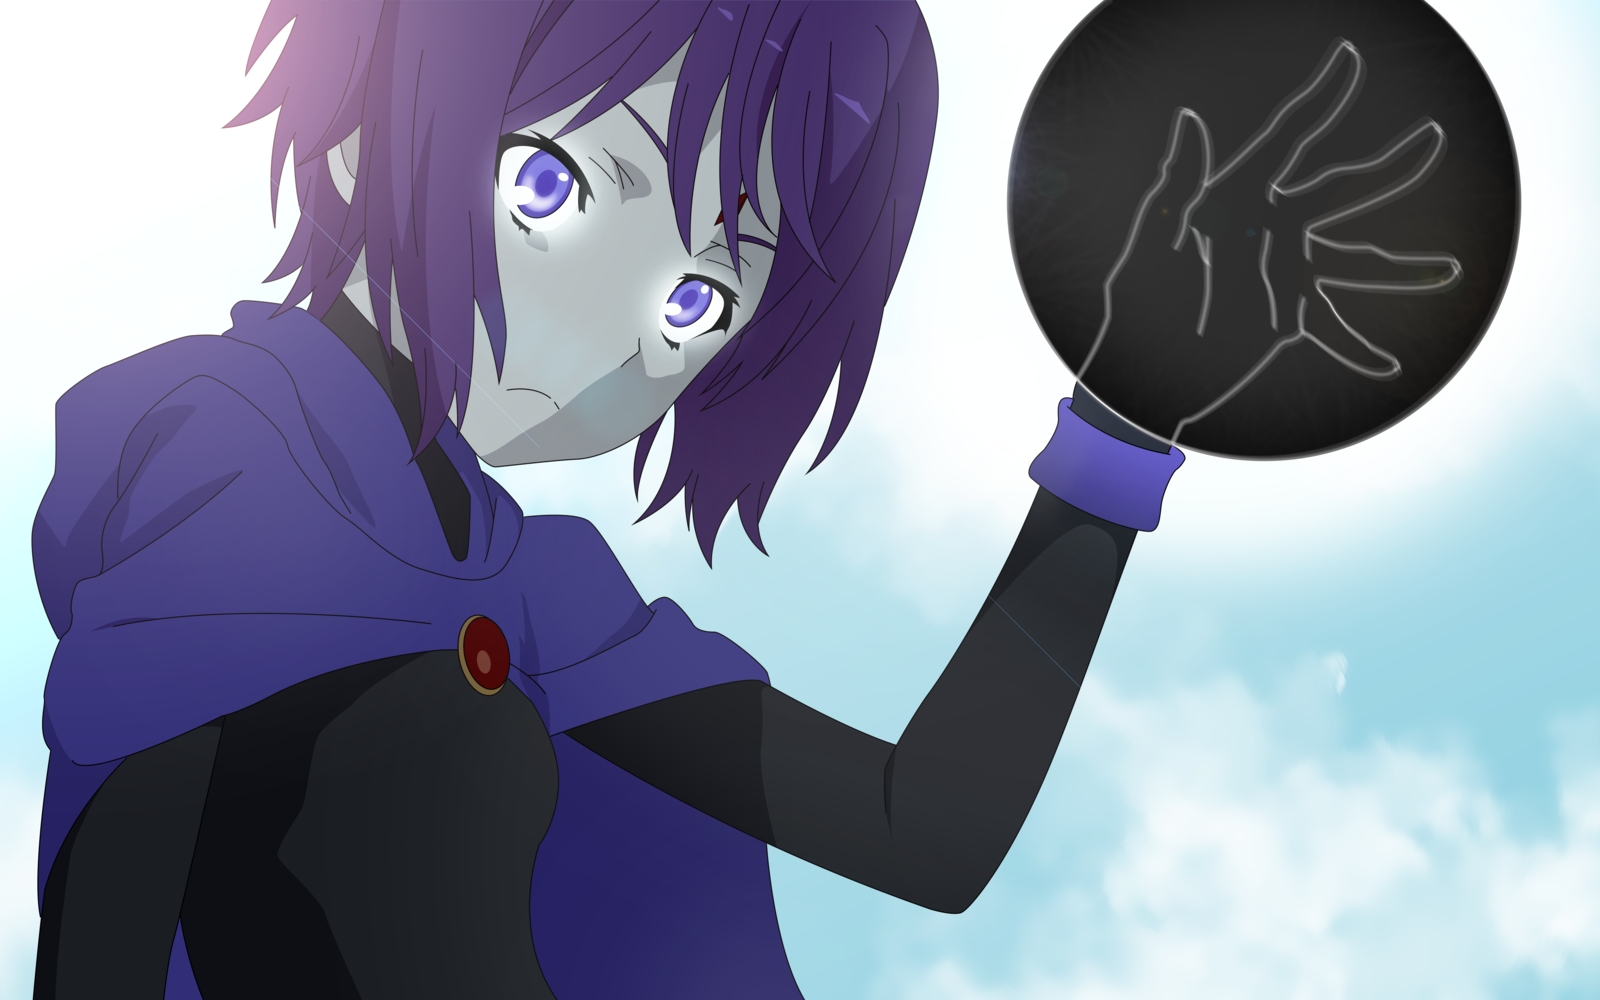 Young Raven Anime [Teen Titans][Wallpaper] by geekysoundcat on